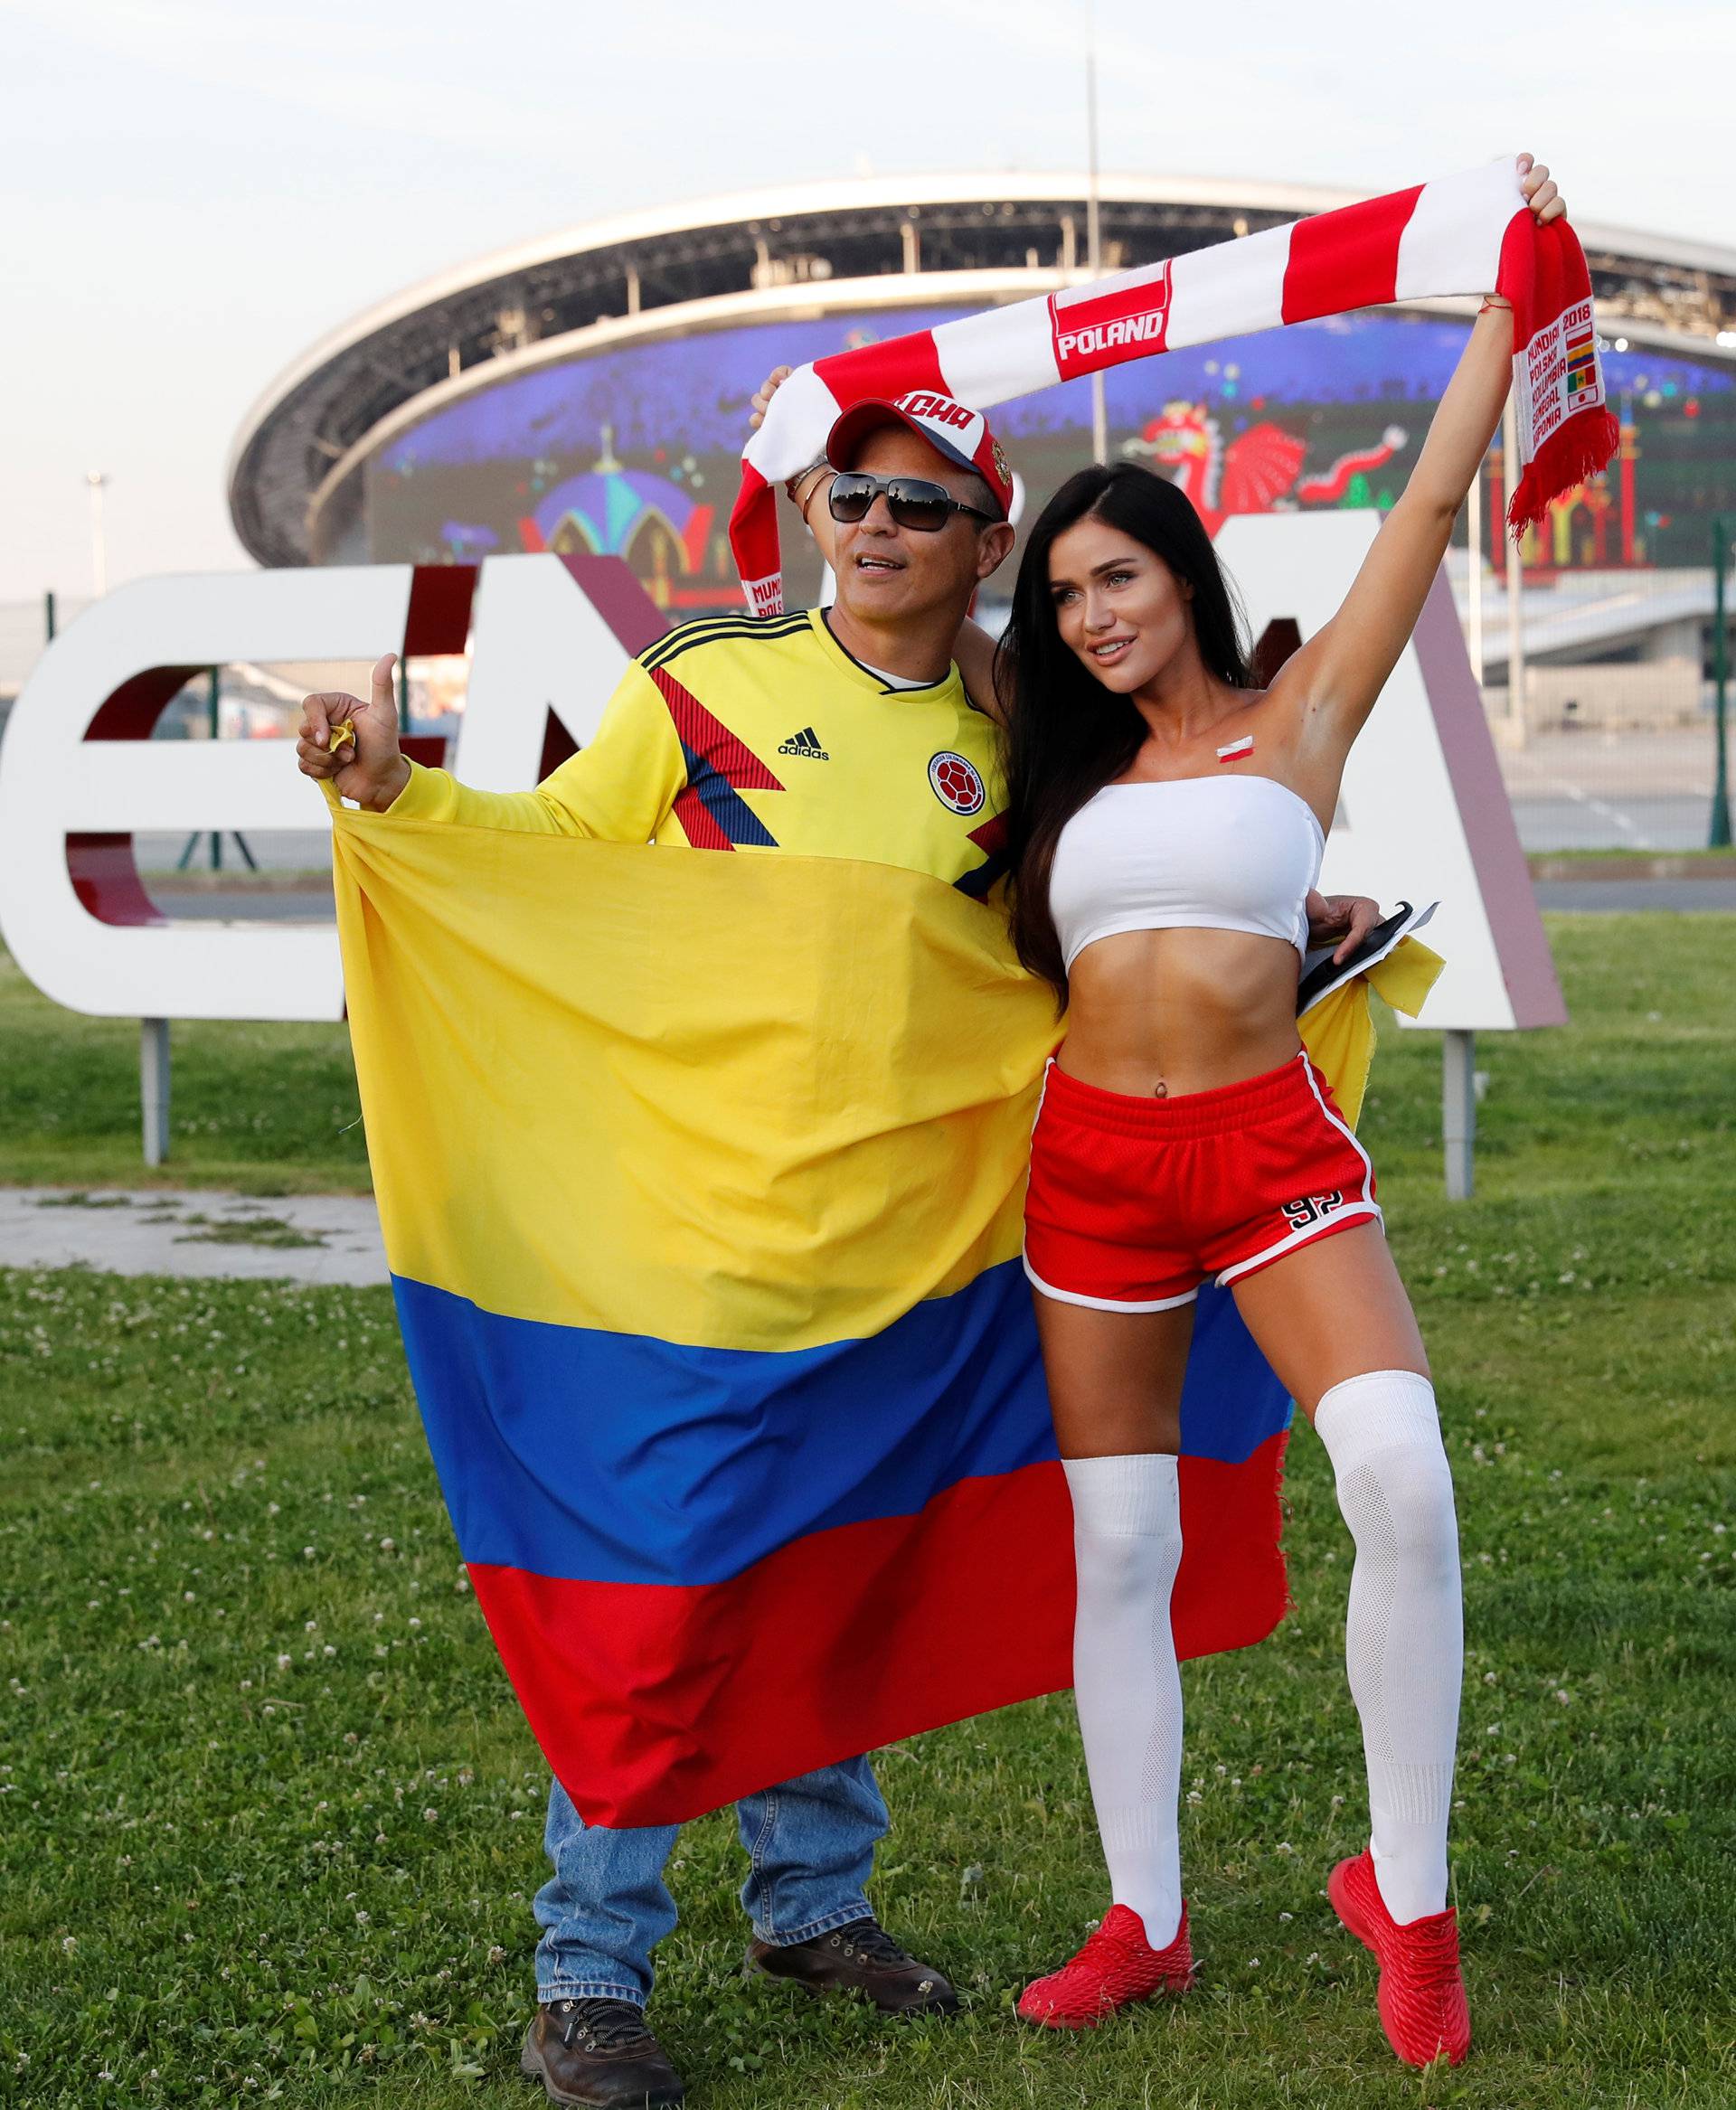 World Cup - Group H - Poland vs Colombia